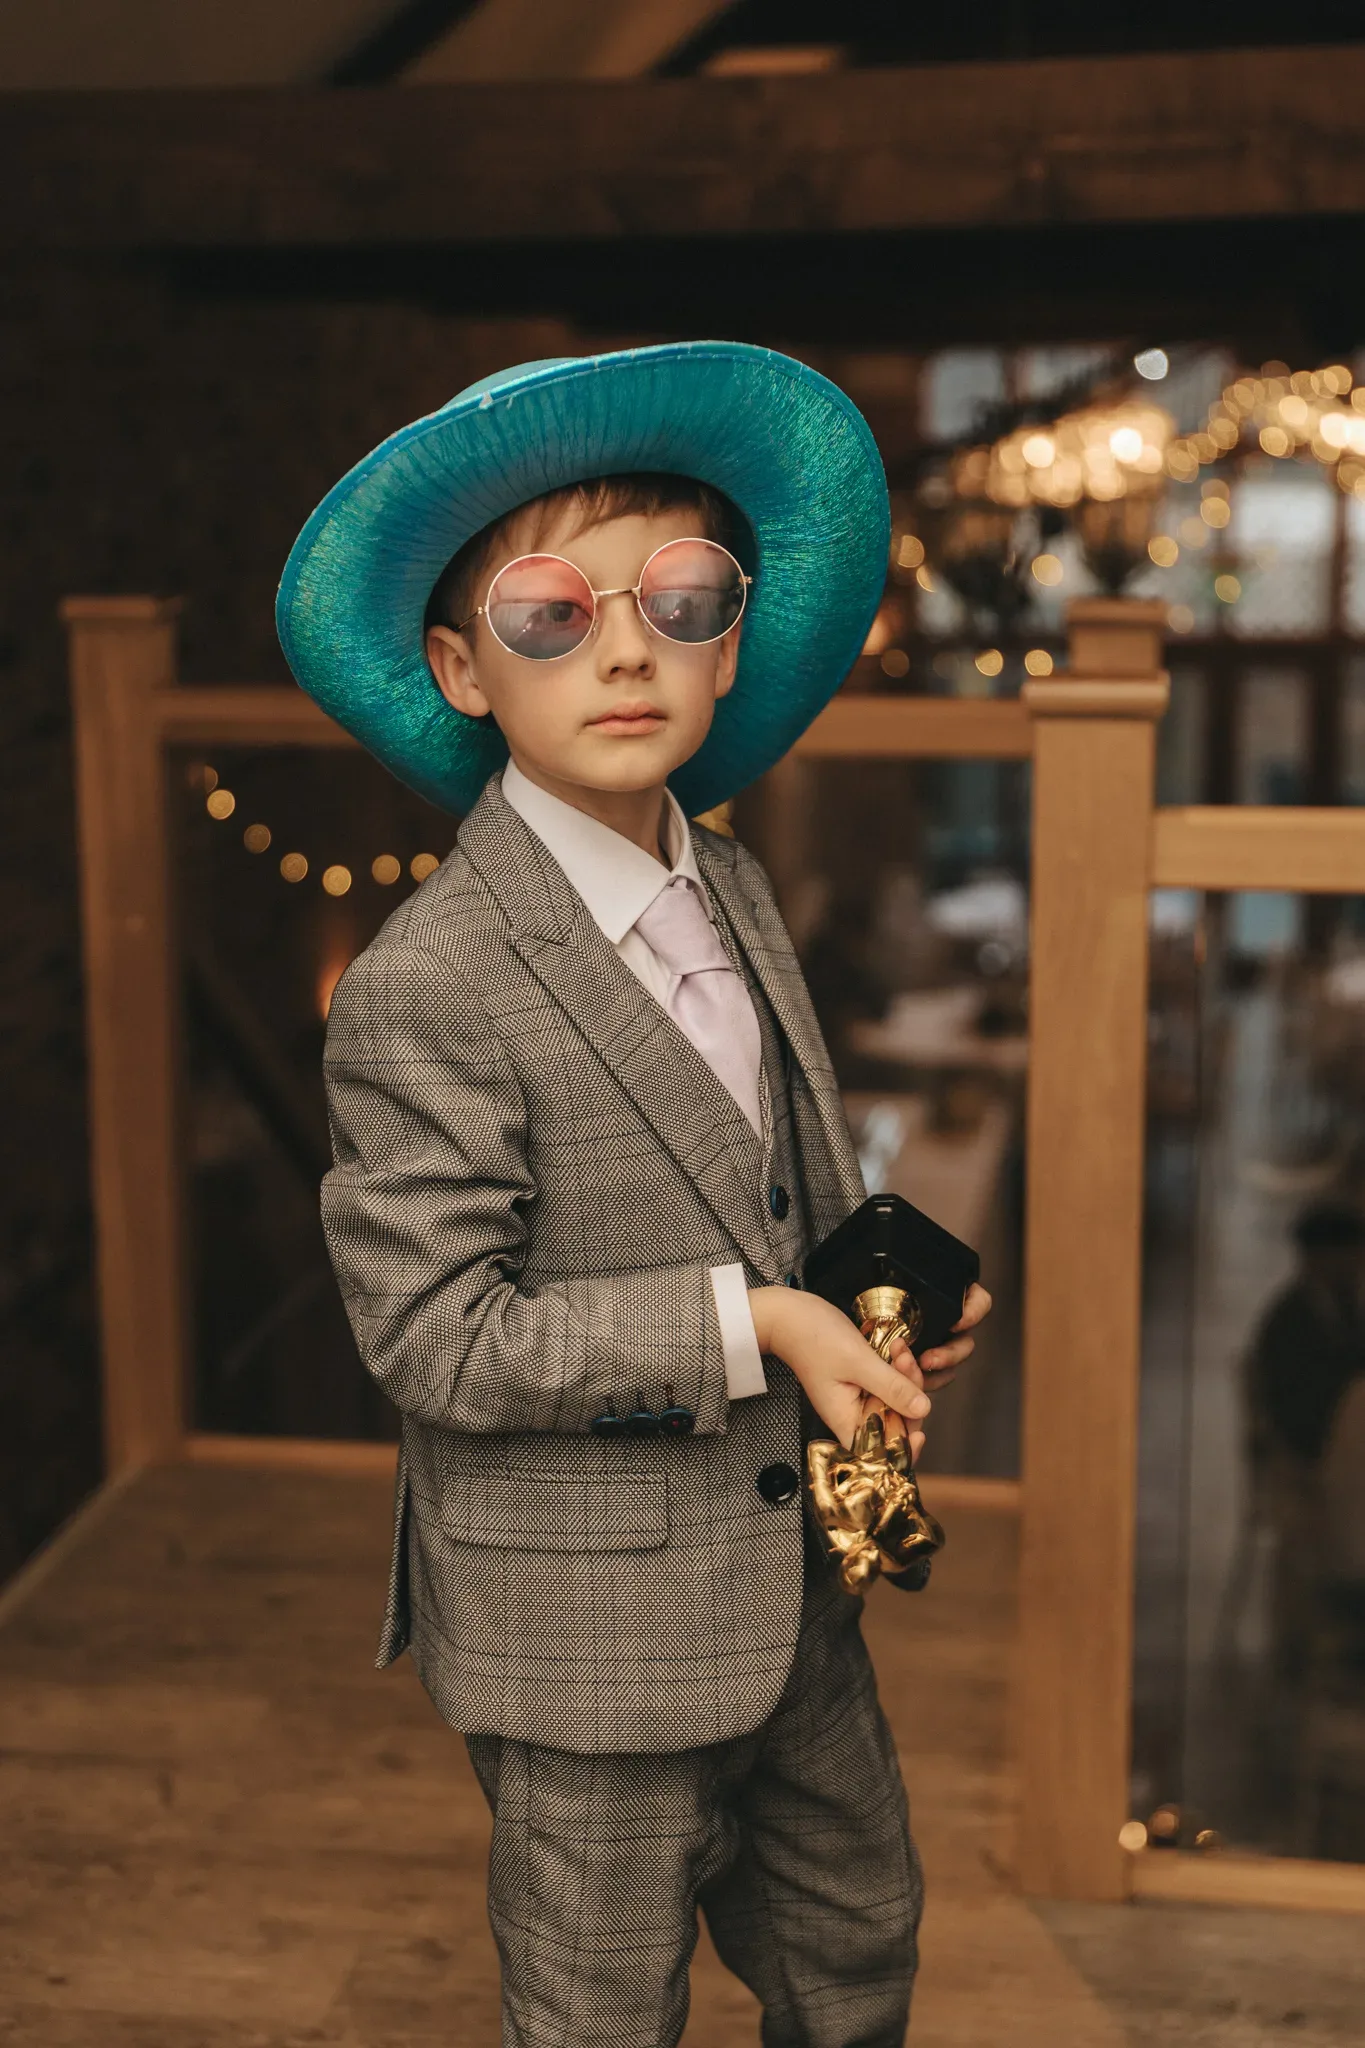 A stylish young boy wearing a gray suit, oversized pink glasses, and a blue hat confidently poses with a golden trophy, exuding a charming and whimsical blend of formality and fun.